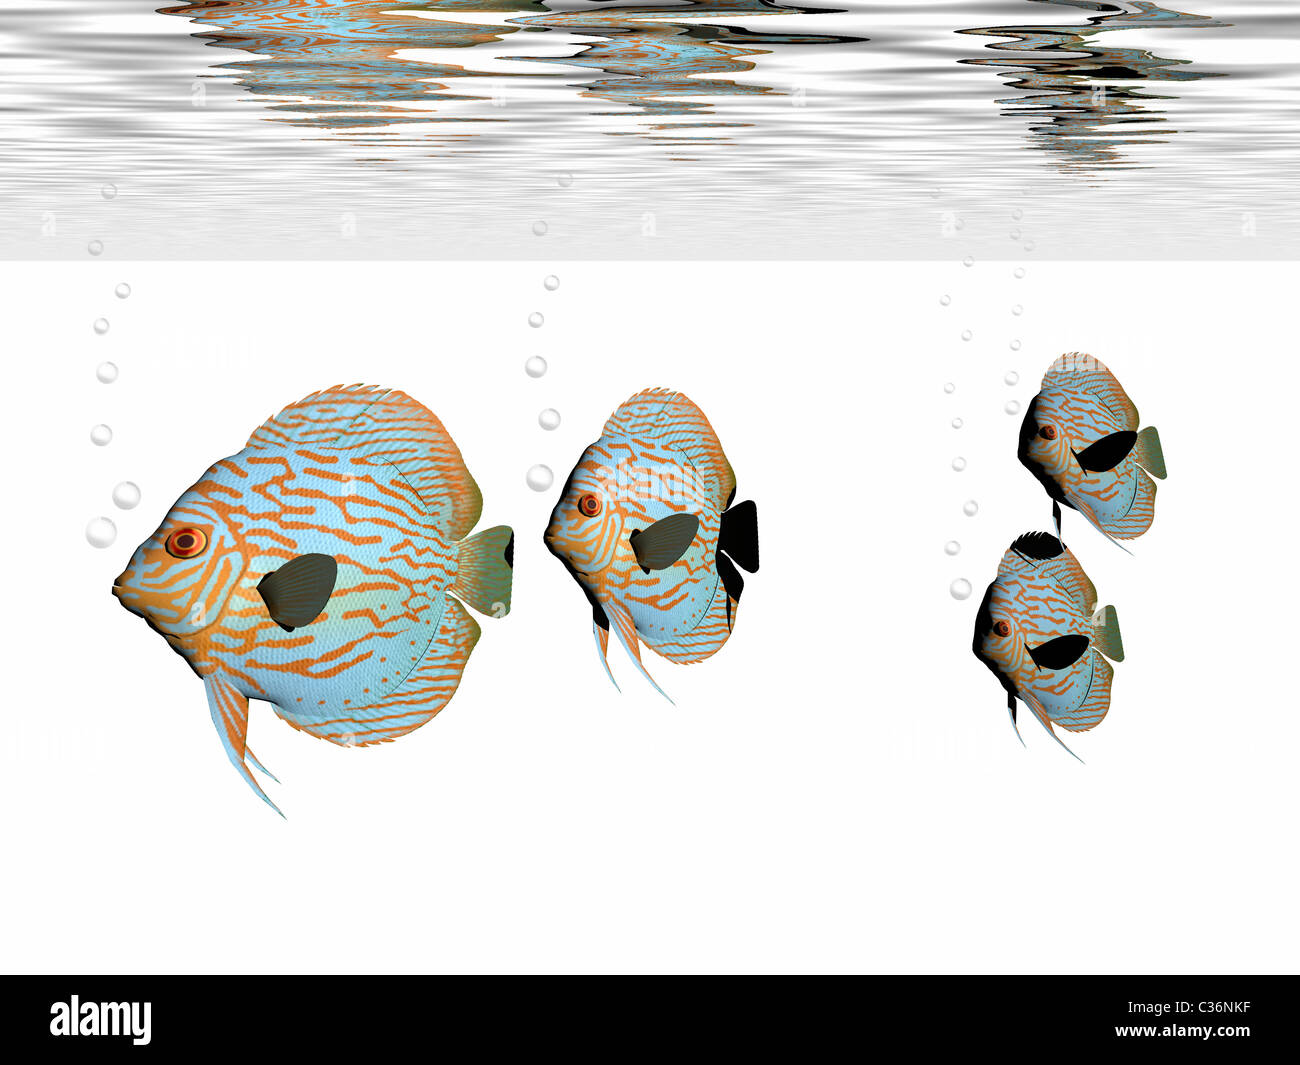 A group of discus fish swim together in an aquarium. Stock Photo